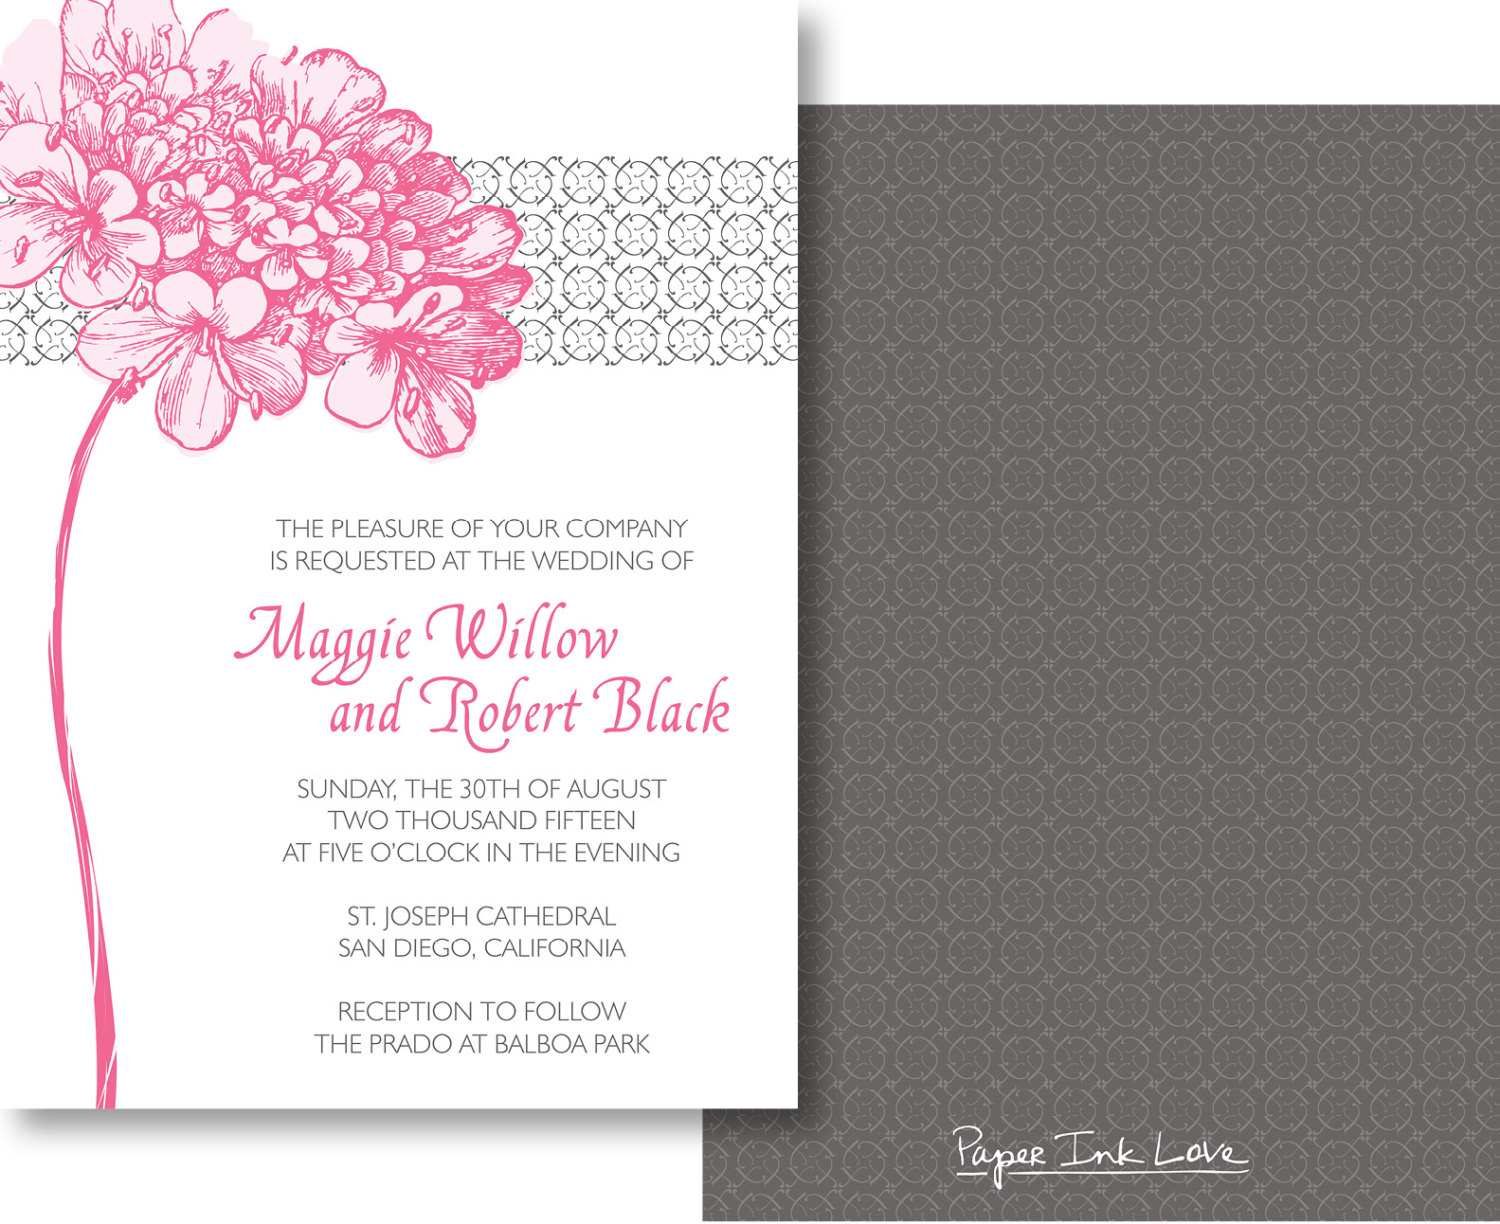 printables - for when you need wedding invitations fast